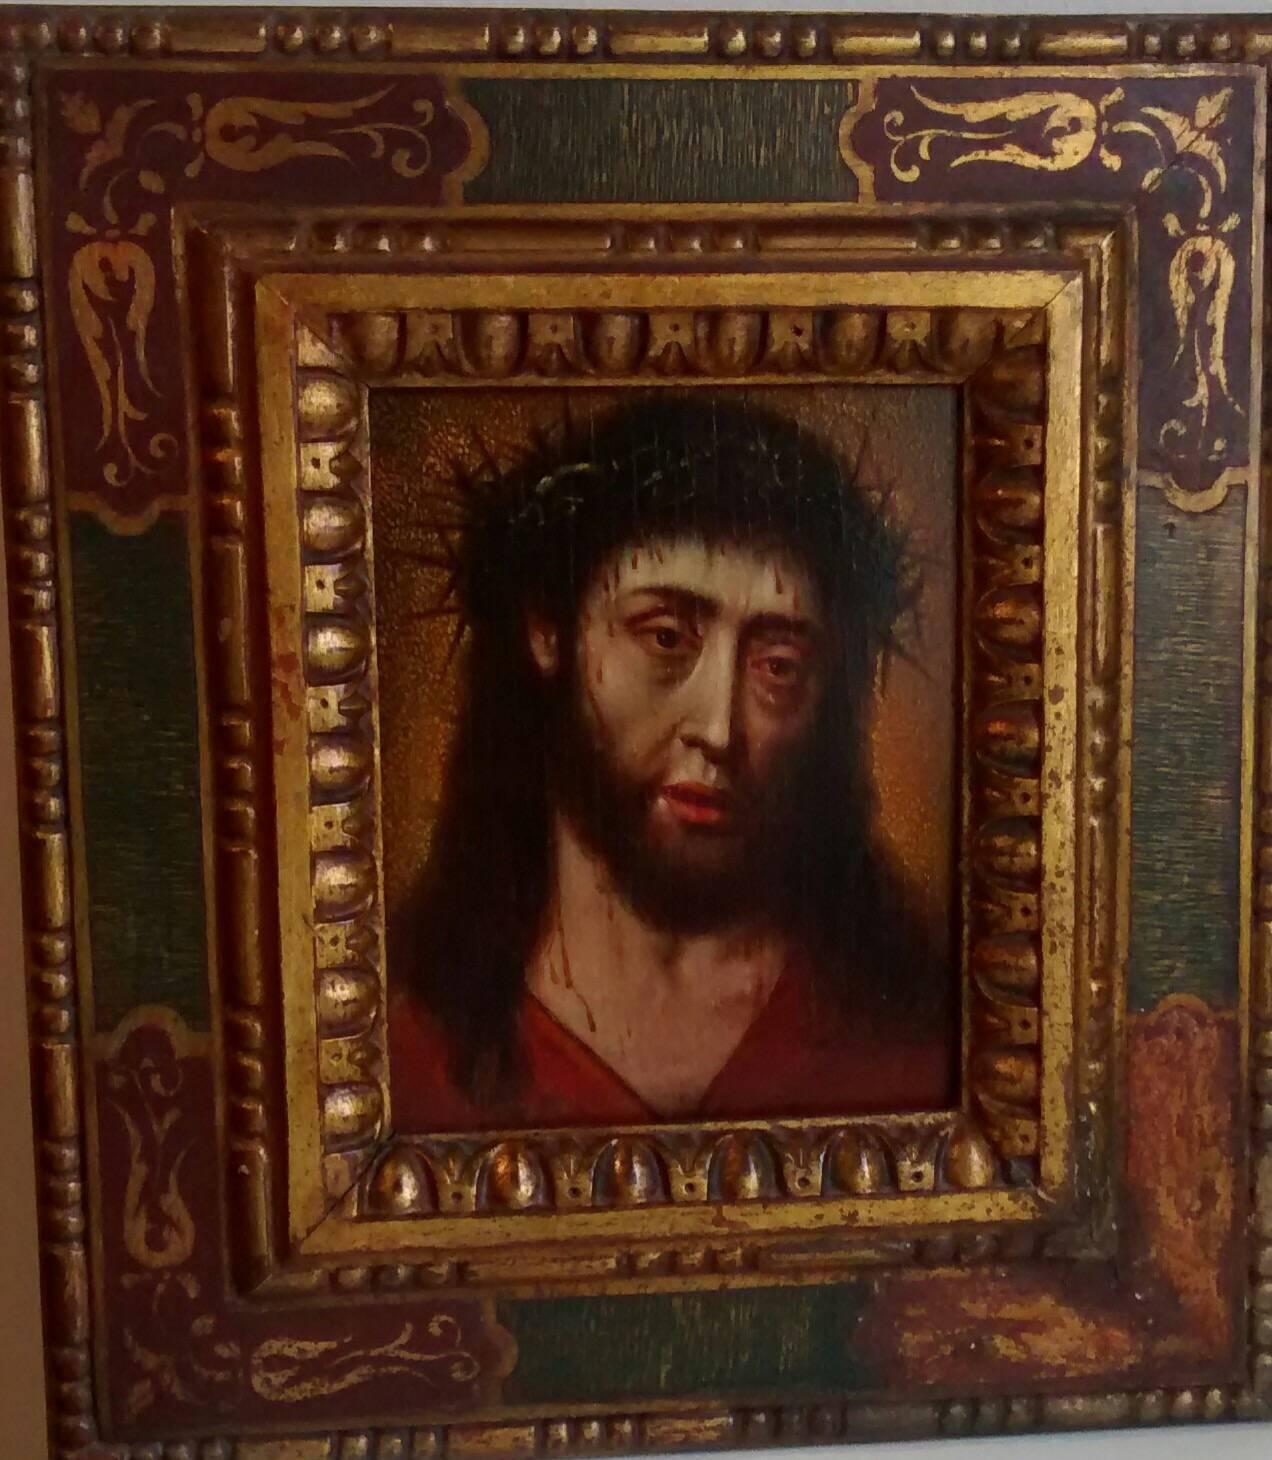 CHRIST - Painting by Unknown